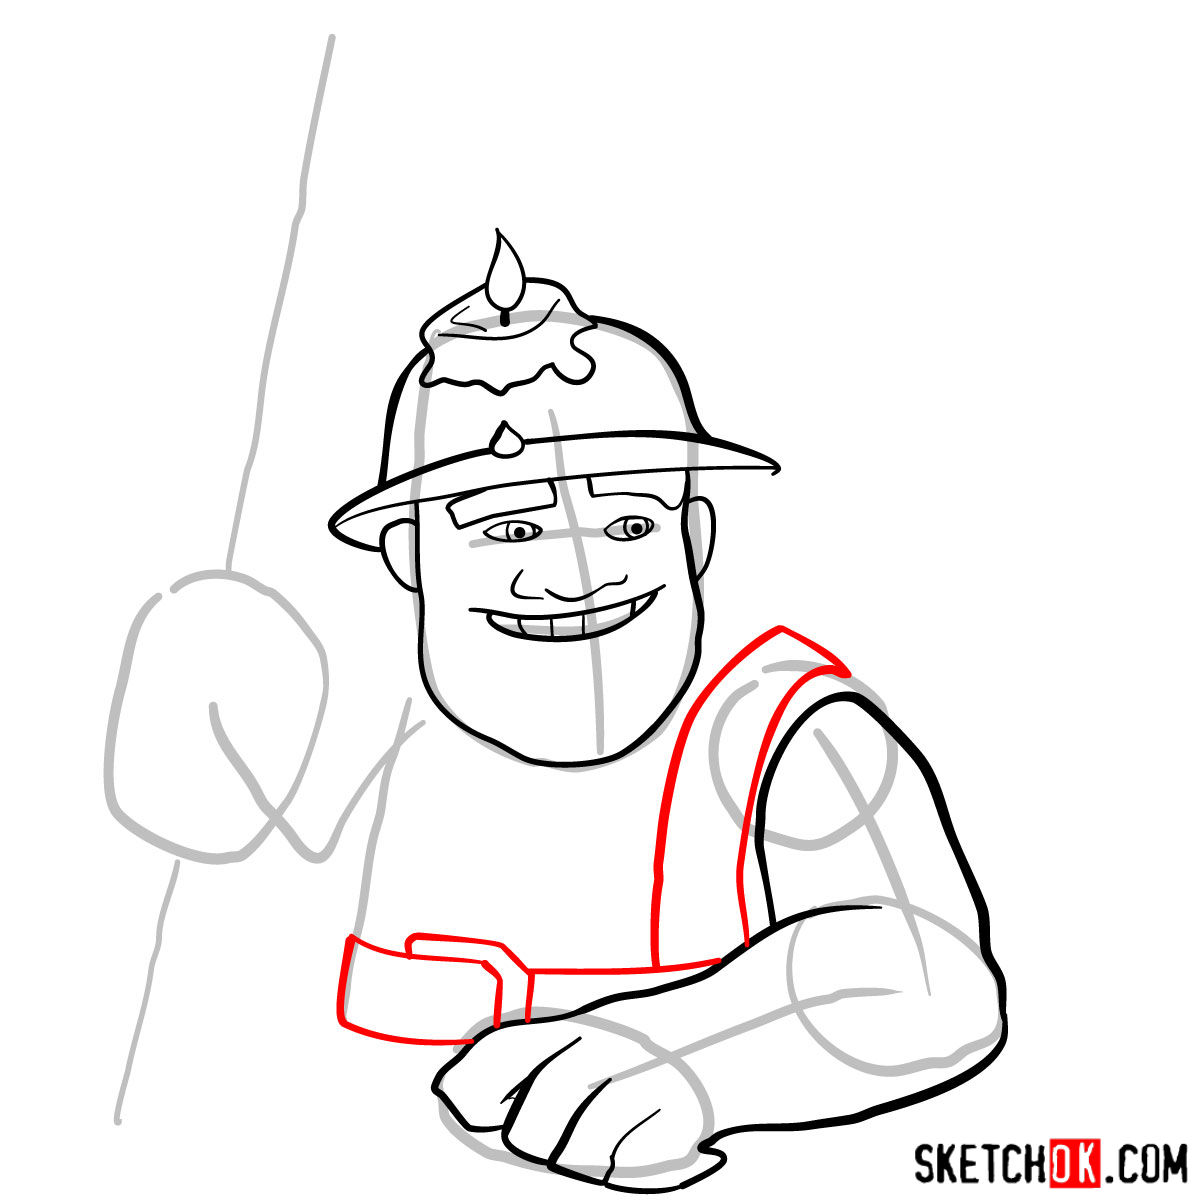 How to draw Miner from Clash of Clans game - step 07